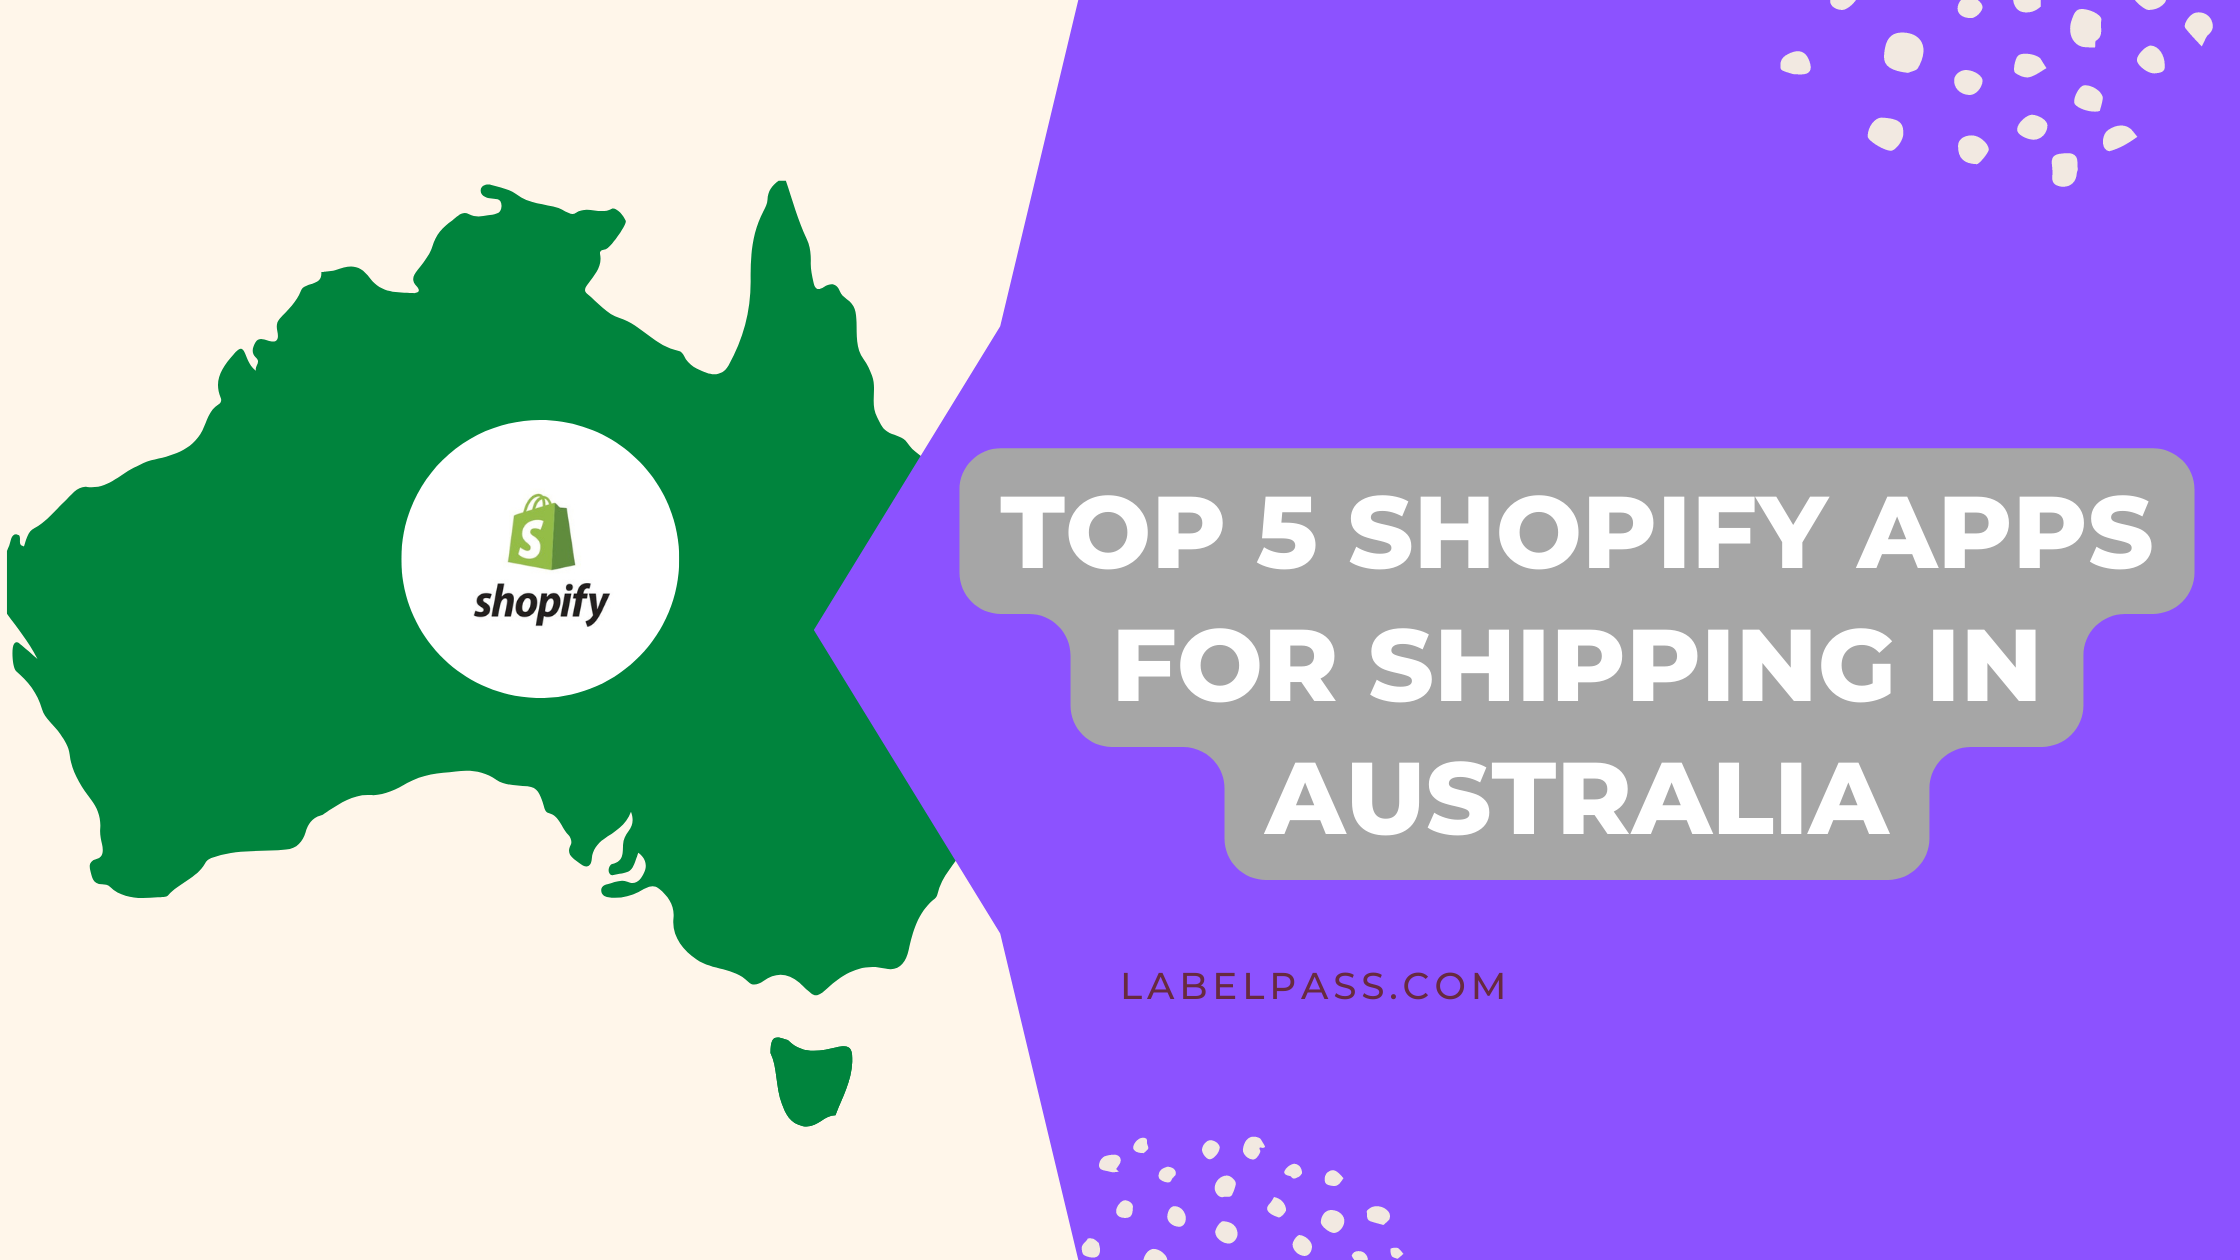 Top 5 Shopify Apps for Shipping in Australia